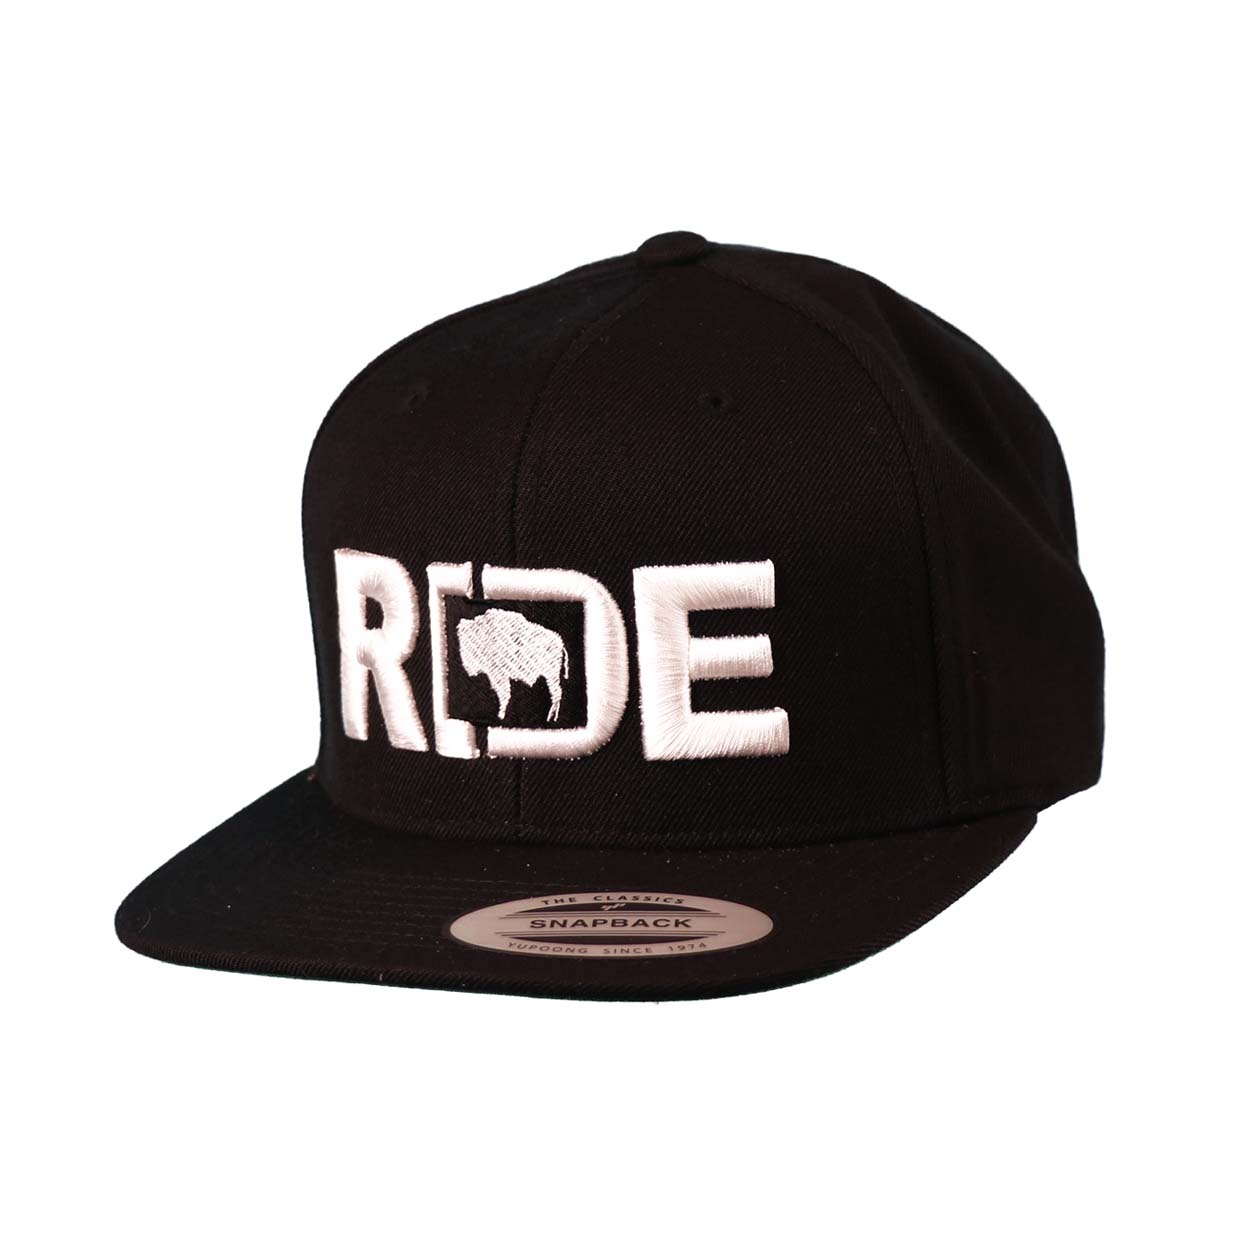 Ride Wyoming Classic Pro 3D Puff Embroidered Snapback Flat Brim Hat Black